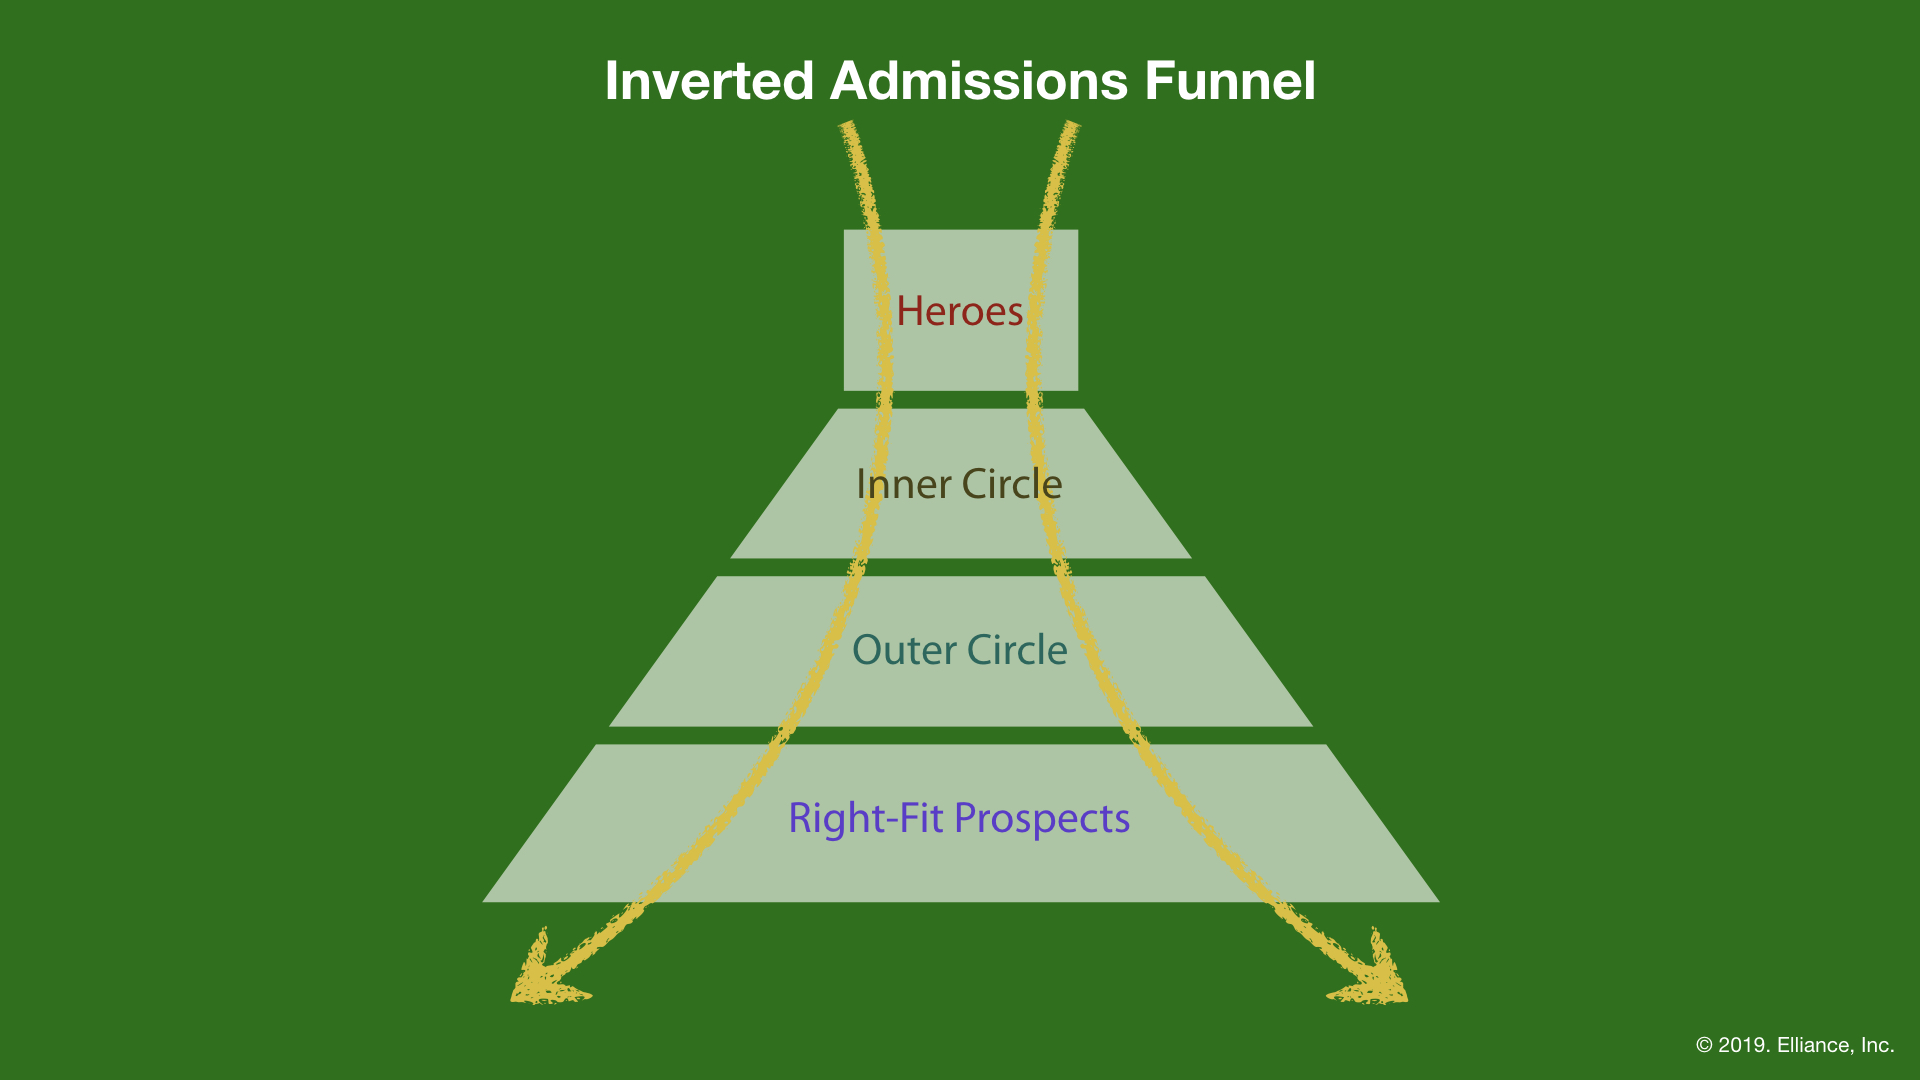 Inverted Admissions Funnel